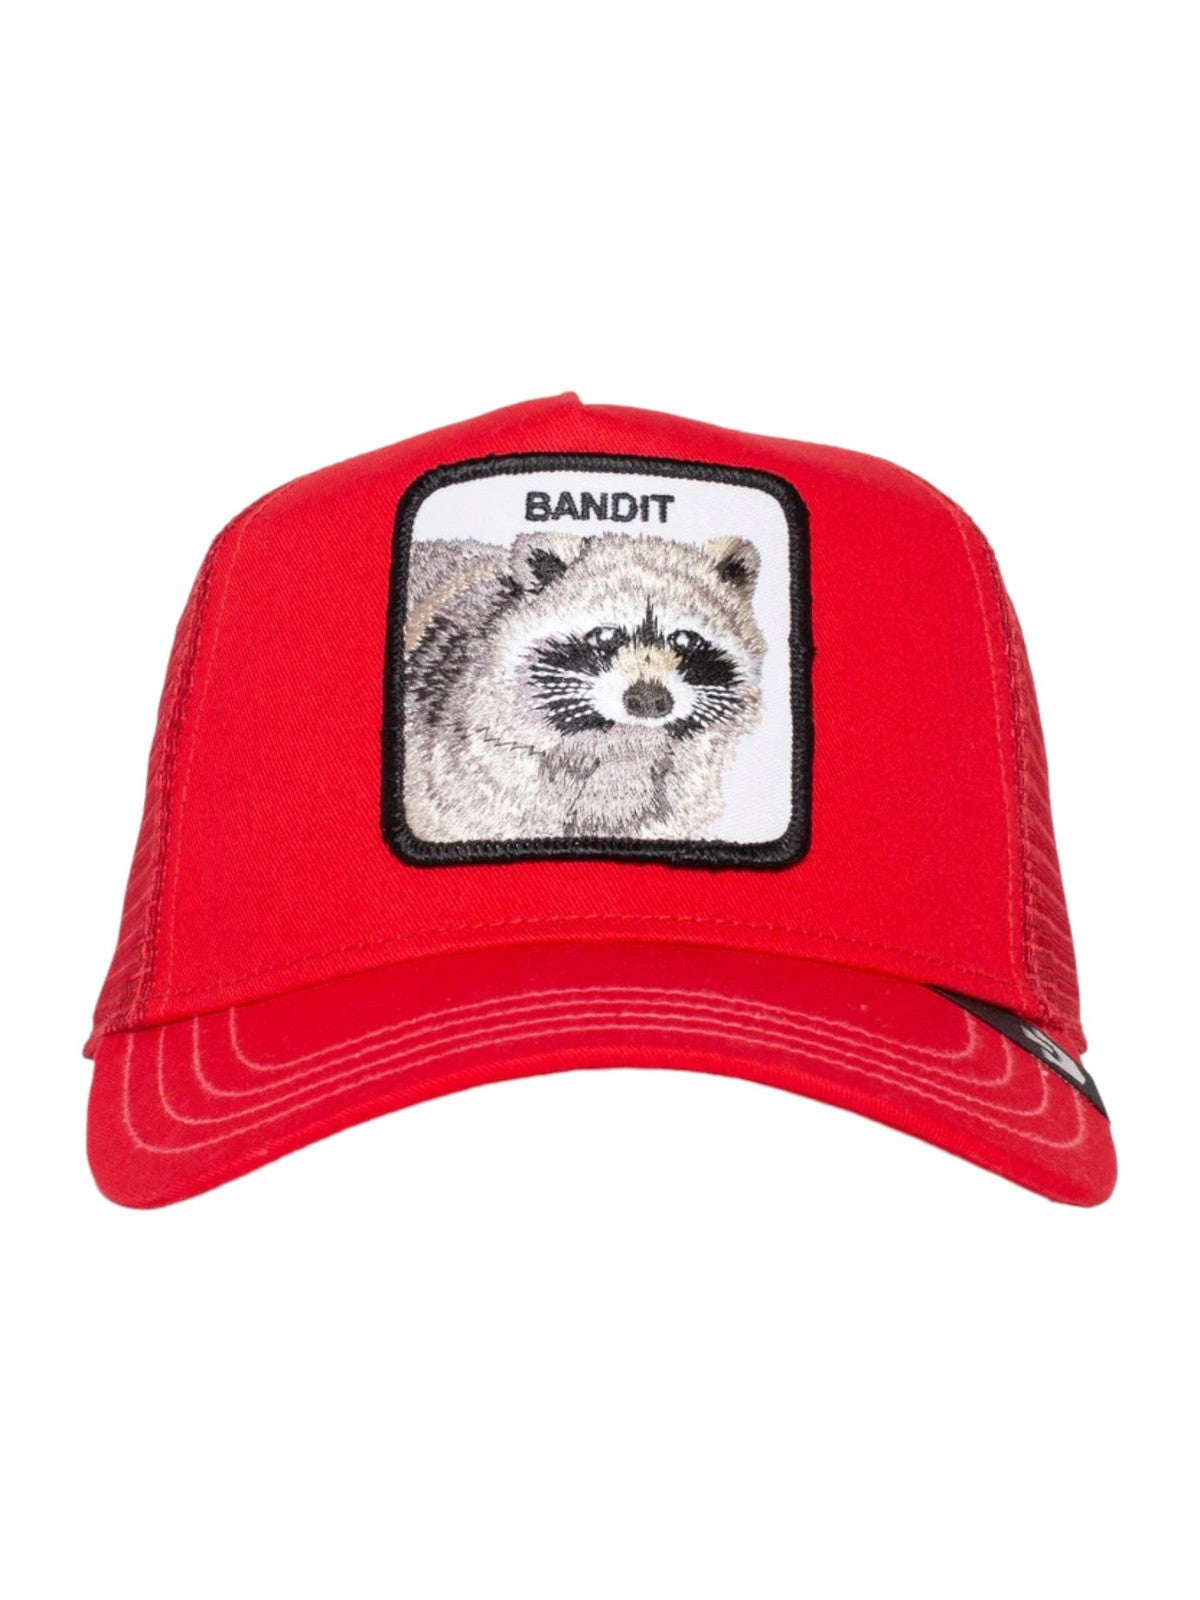 GOORIN BROS Chapeau homme The bandit 101-0379 RED